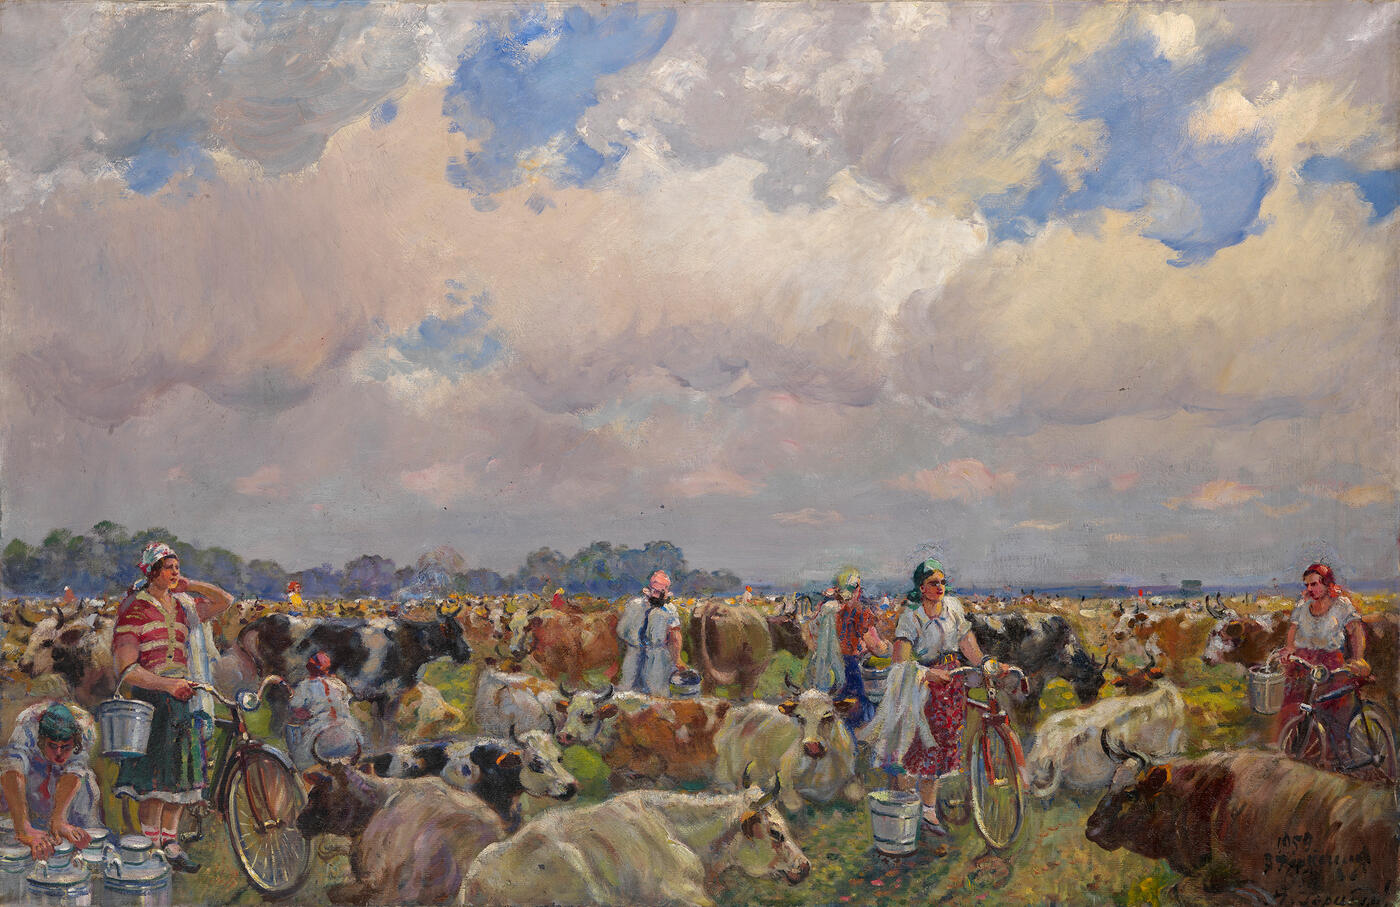 Herd on the Collective Farm